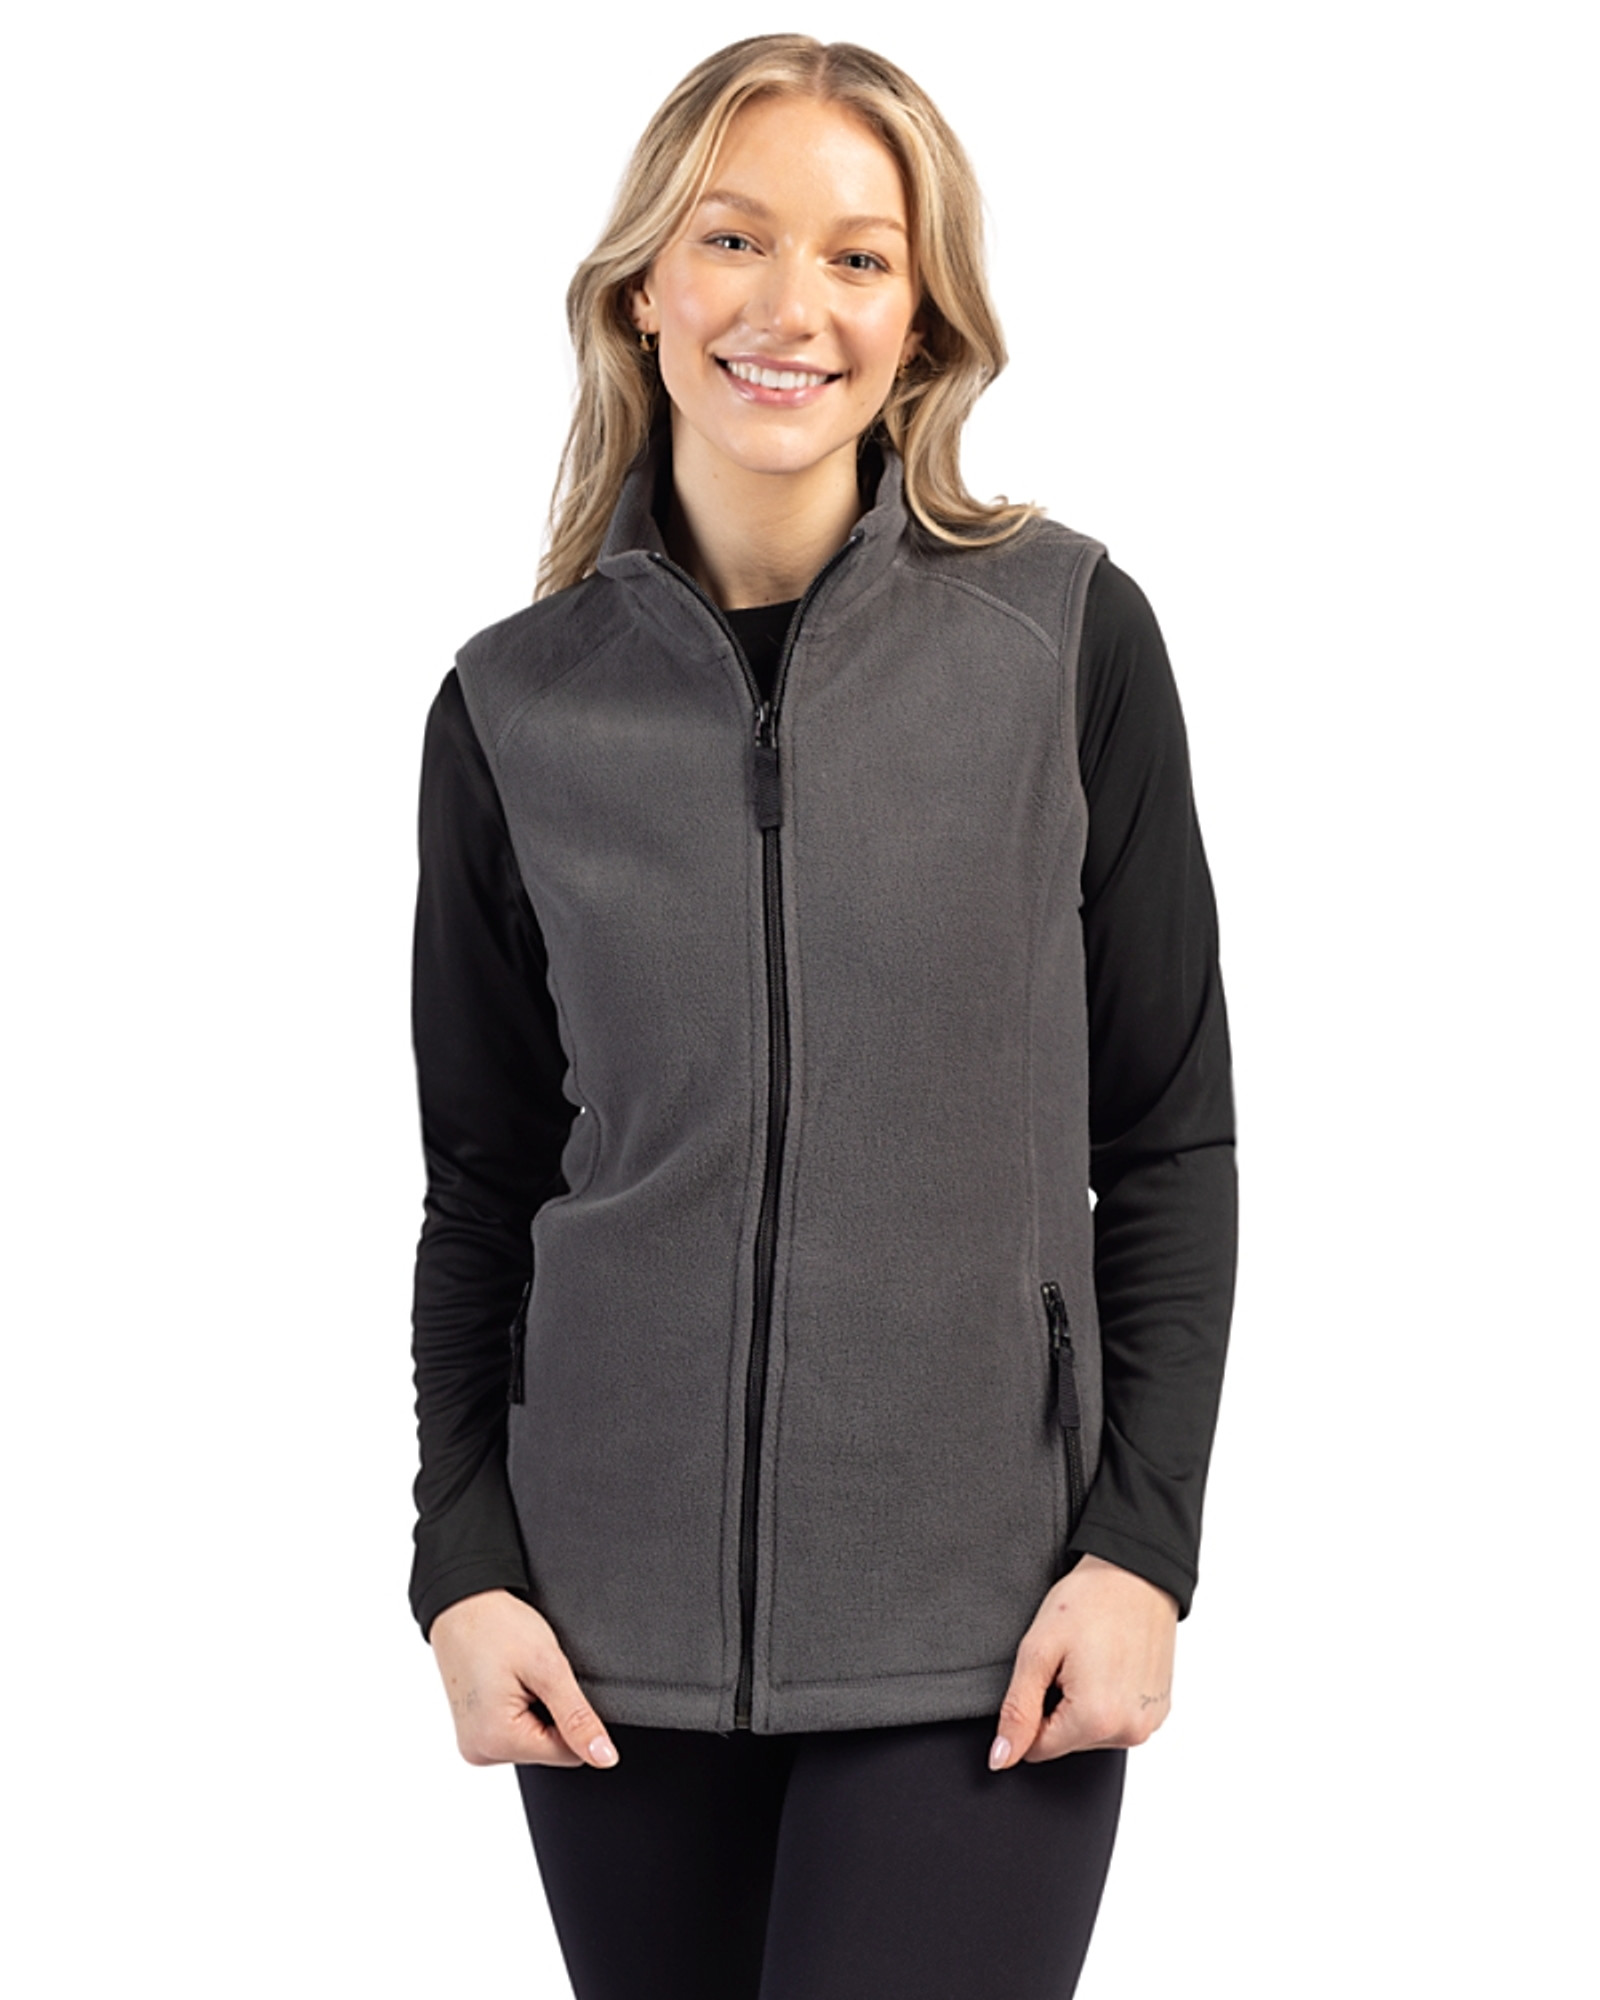 This 'Toasty Warm' Fleece Vest Is Up to 52% Off at